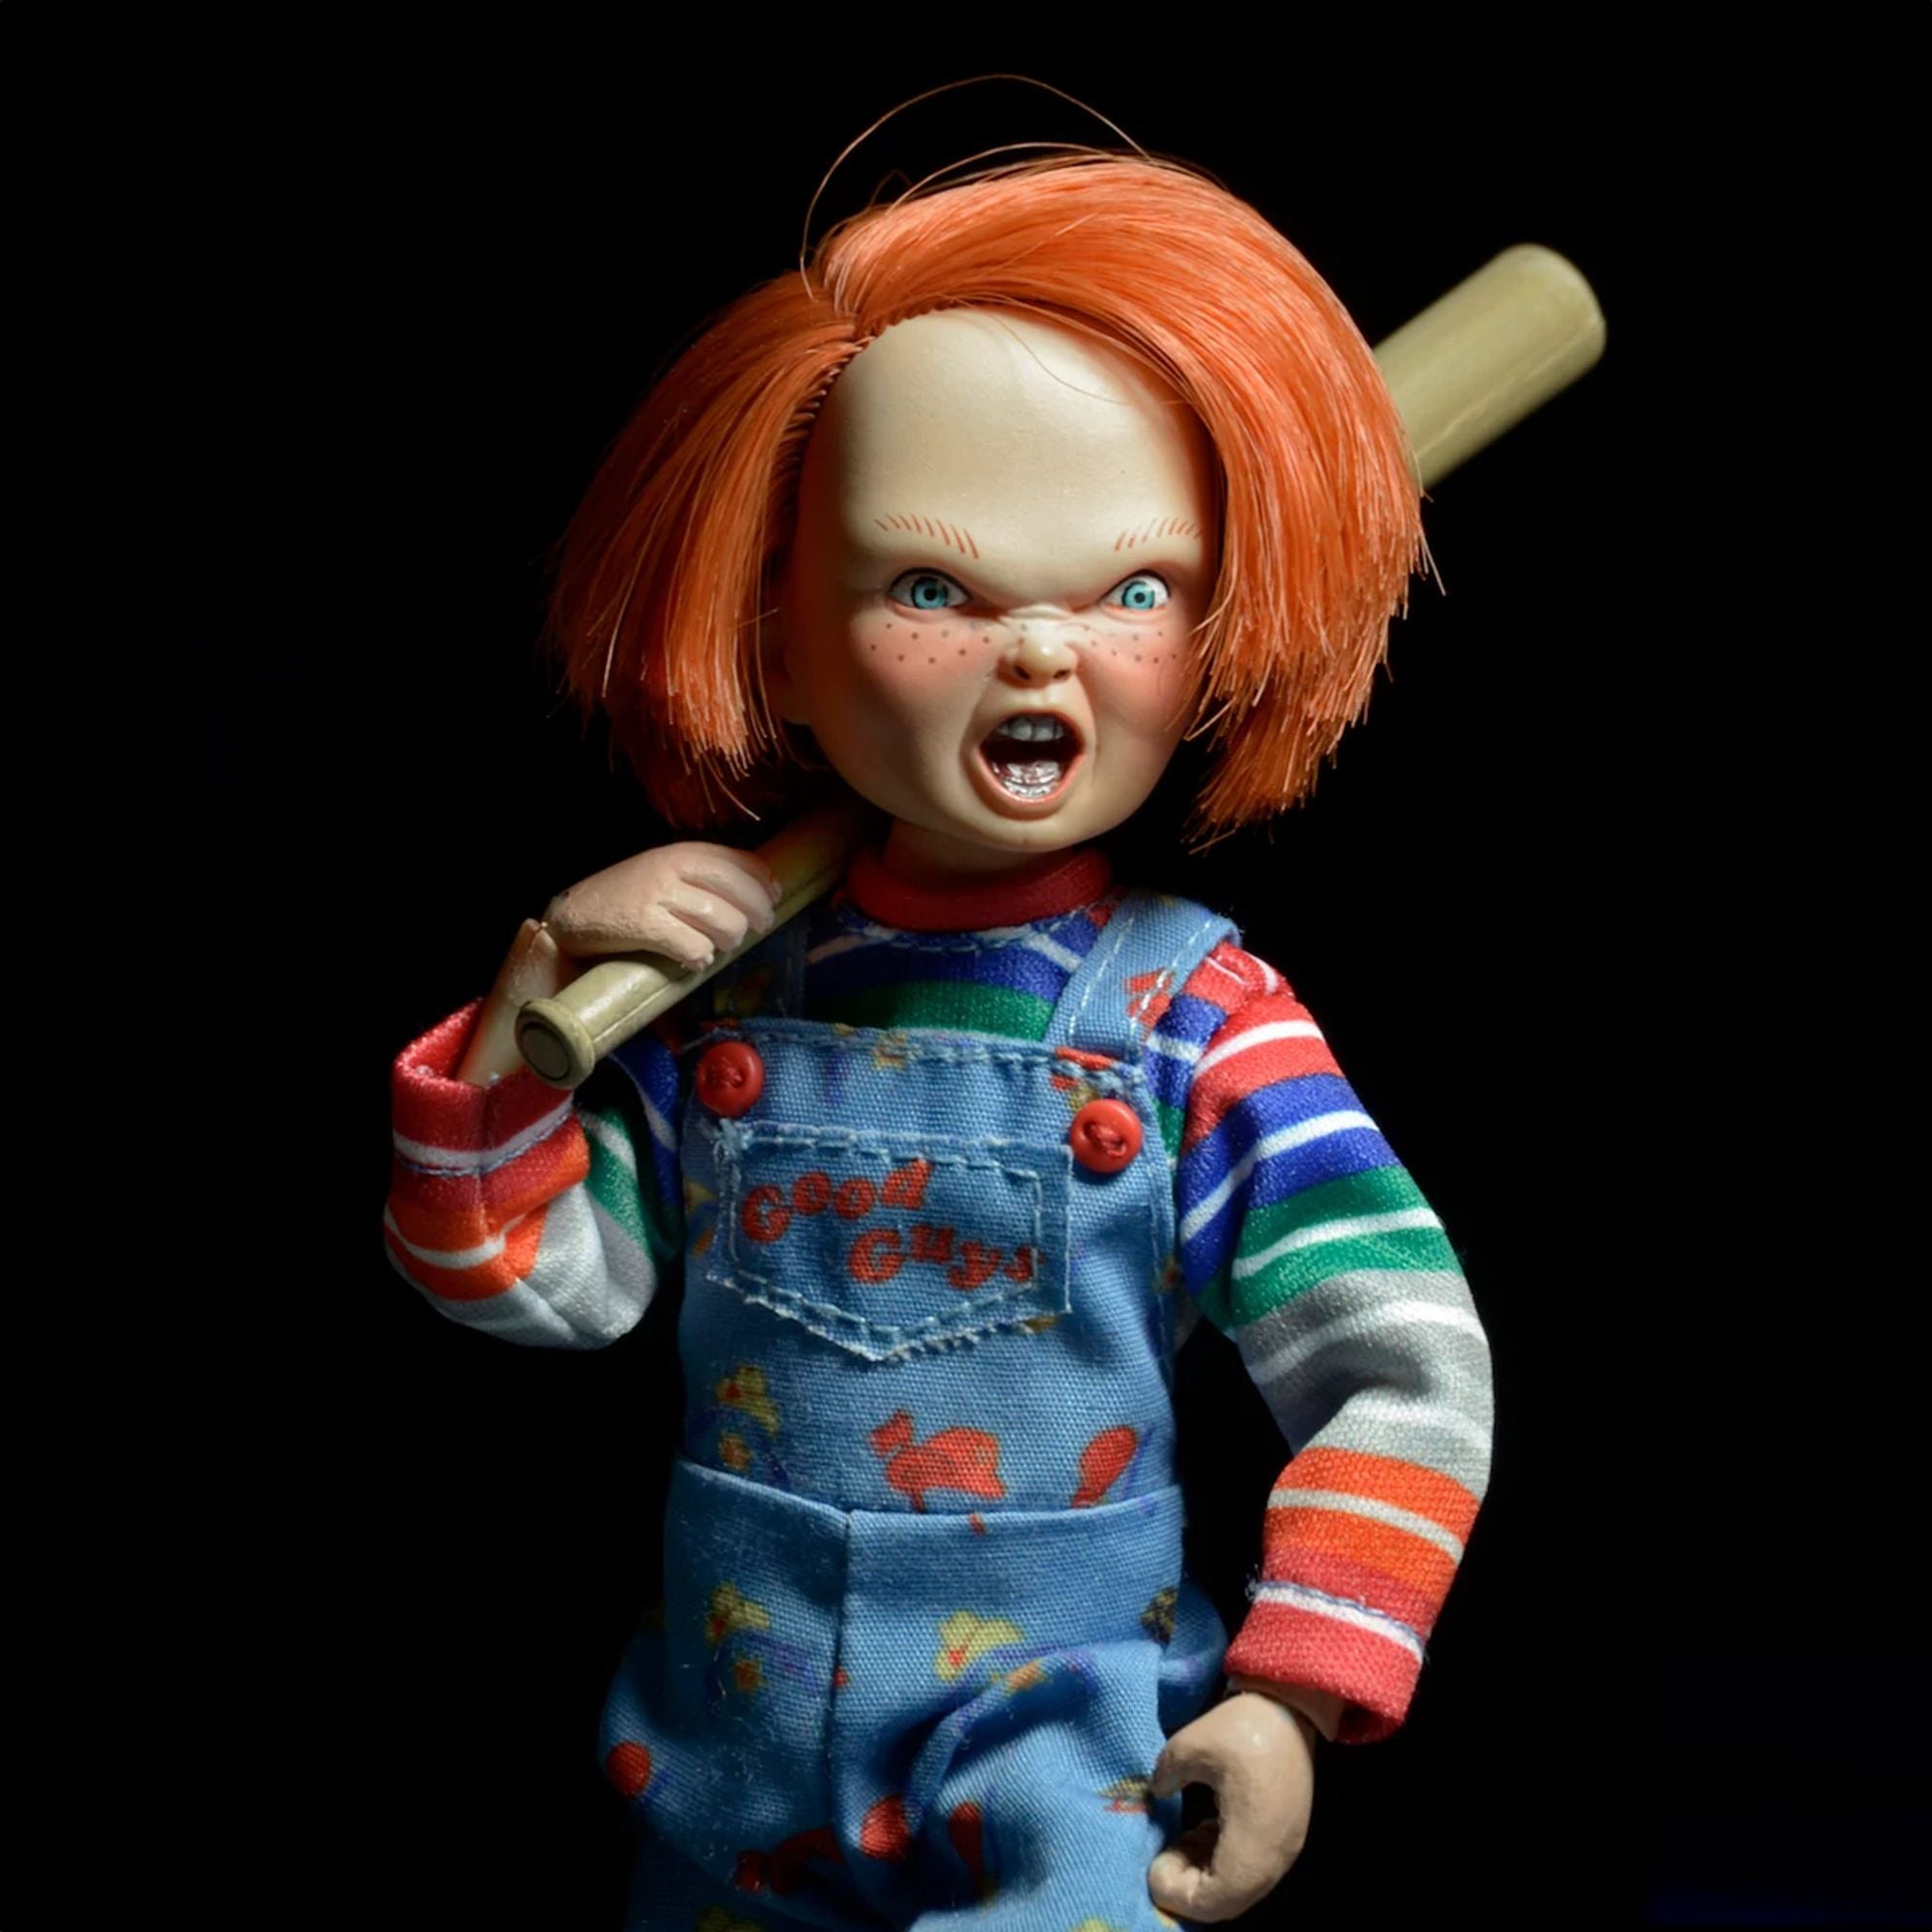 CHUCKY - 8&quot; CLOTHED FIGURE - CHUCKY